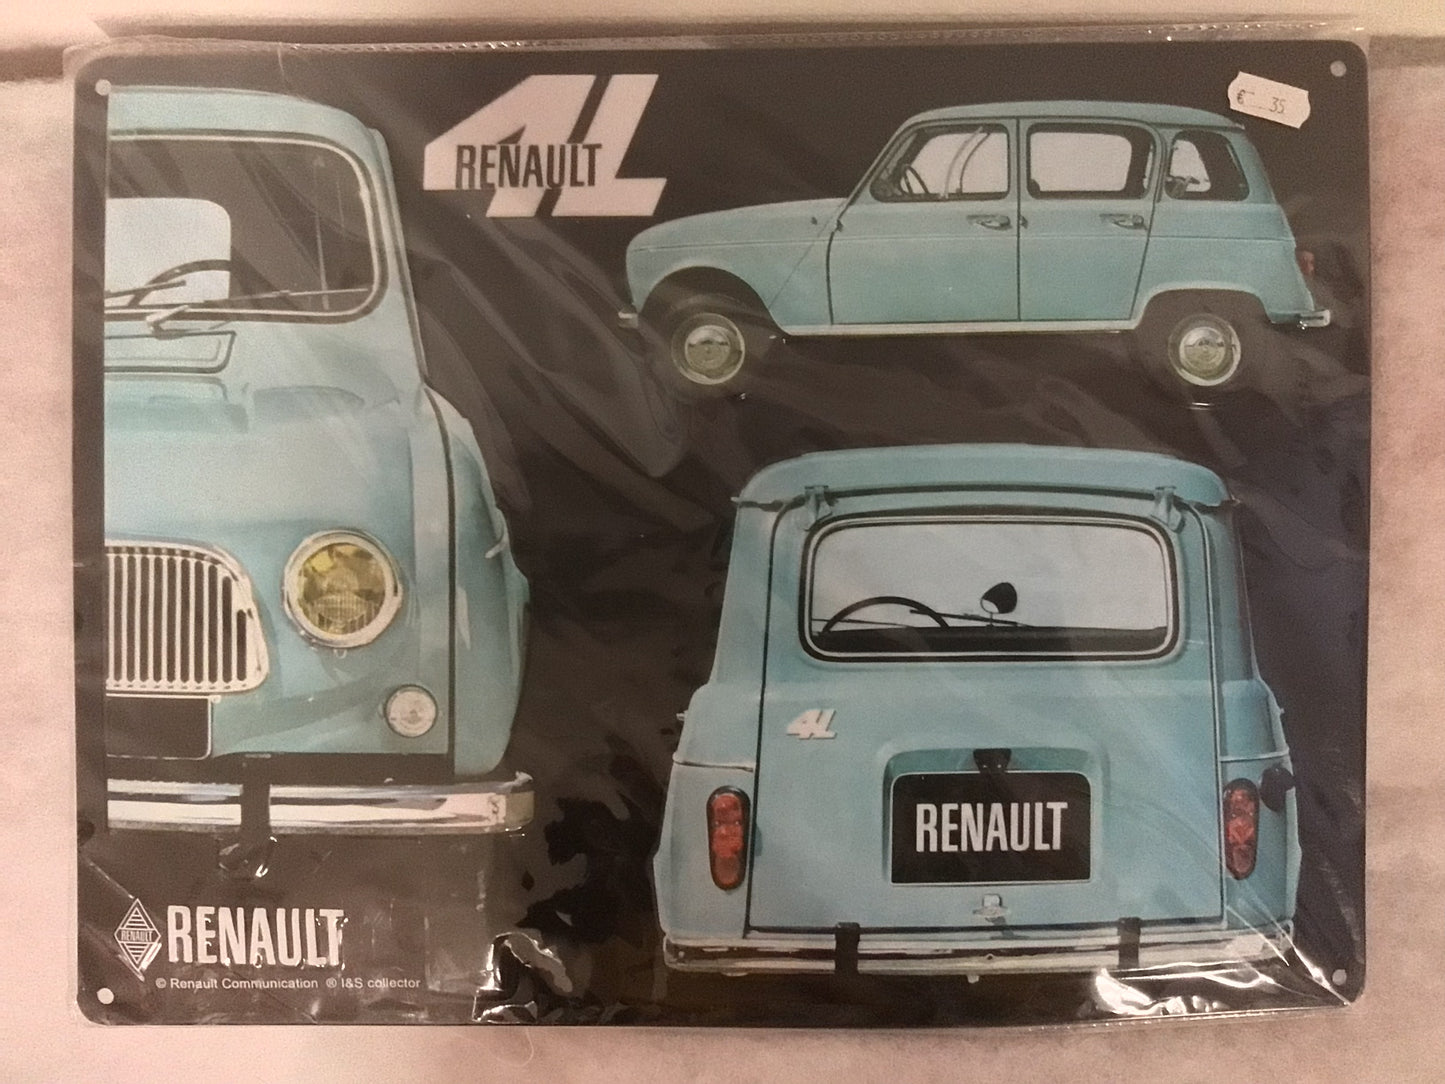 Renault plates with reliefs